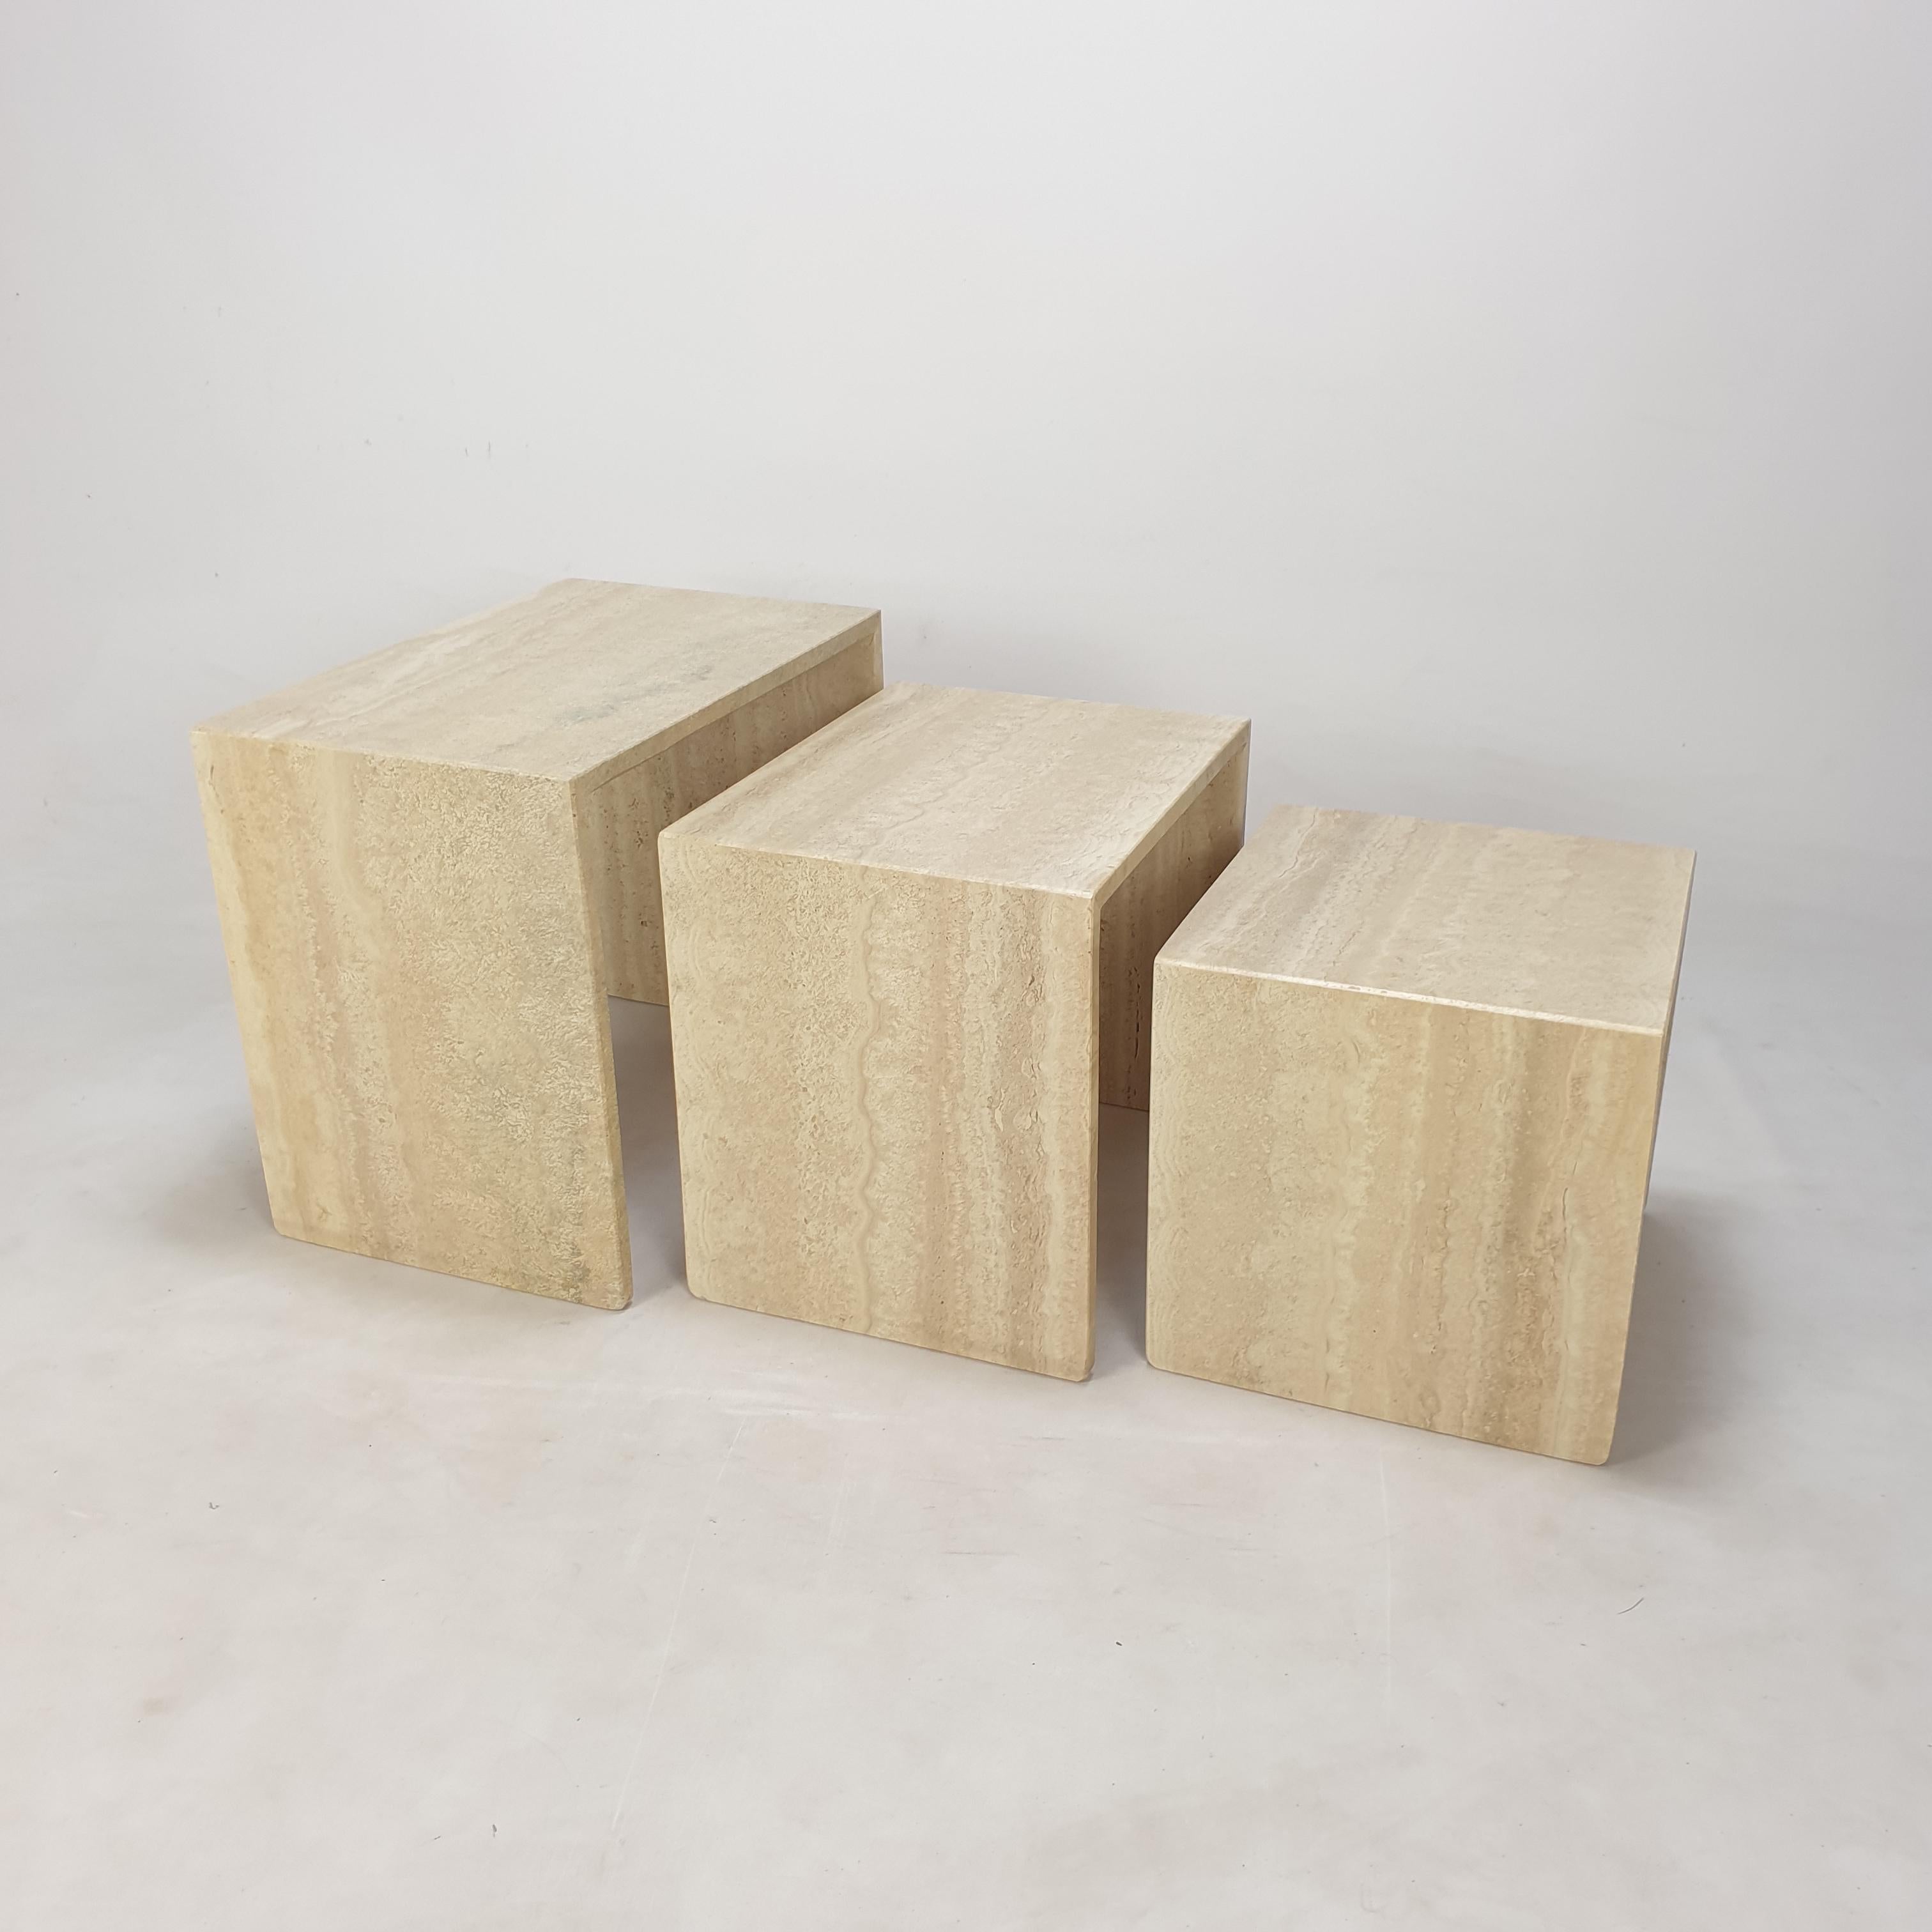 Very nice set of 3 Italian Coffee or Nesting Tables, handcrafted out of travertine. 

The tables have all a different size so they fit in each other.